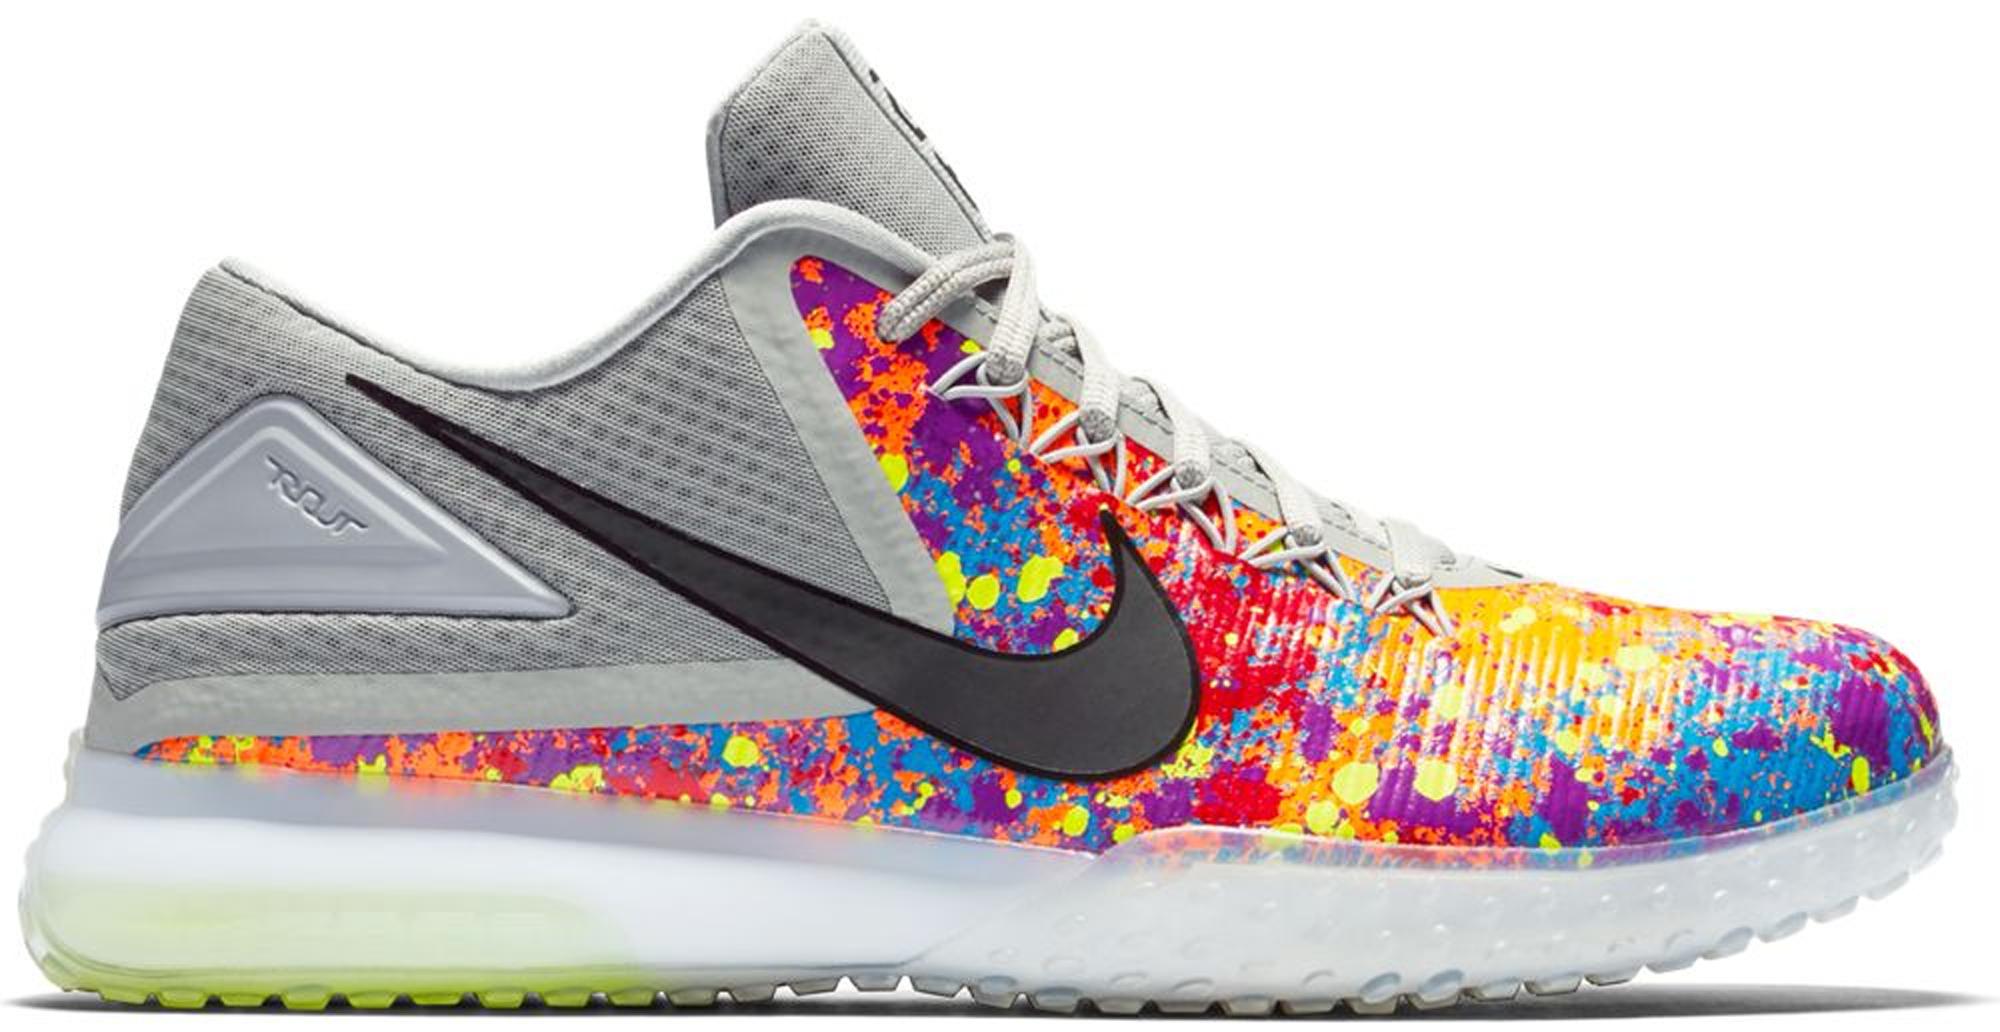 Nike Zoom Trout 3 Turf Multi-color in 